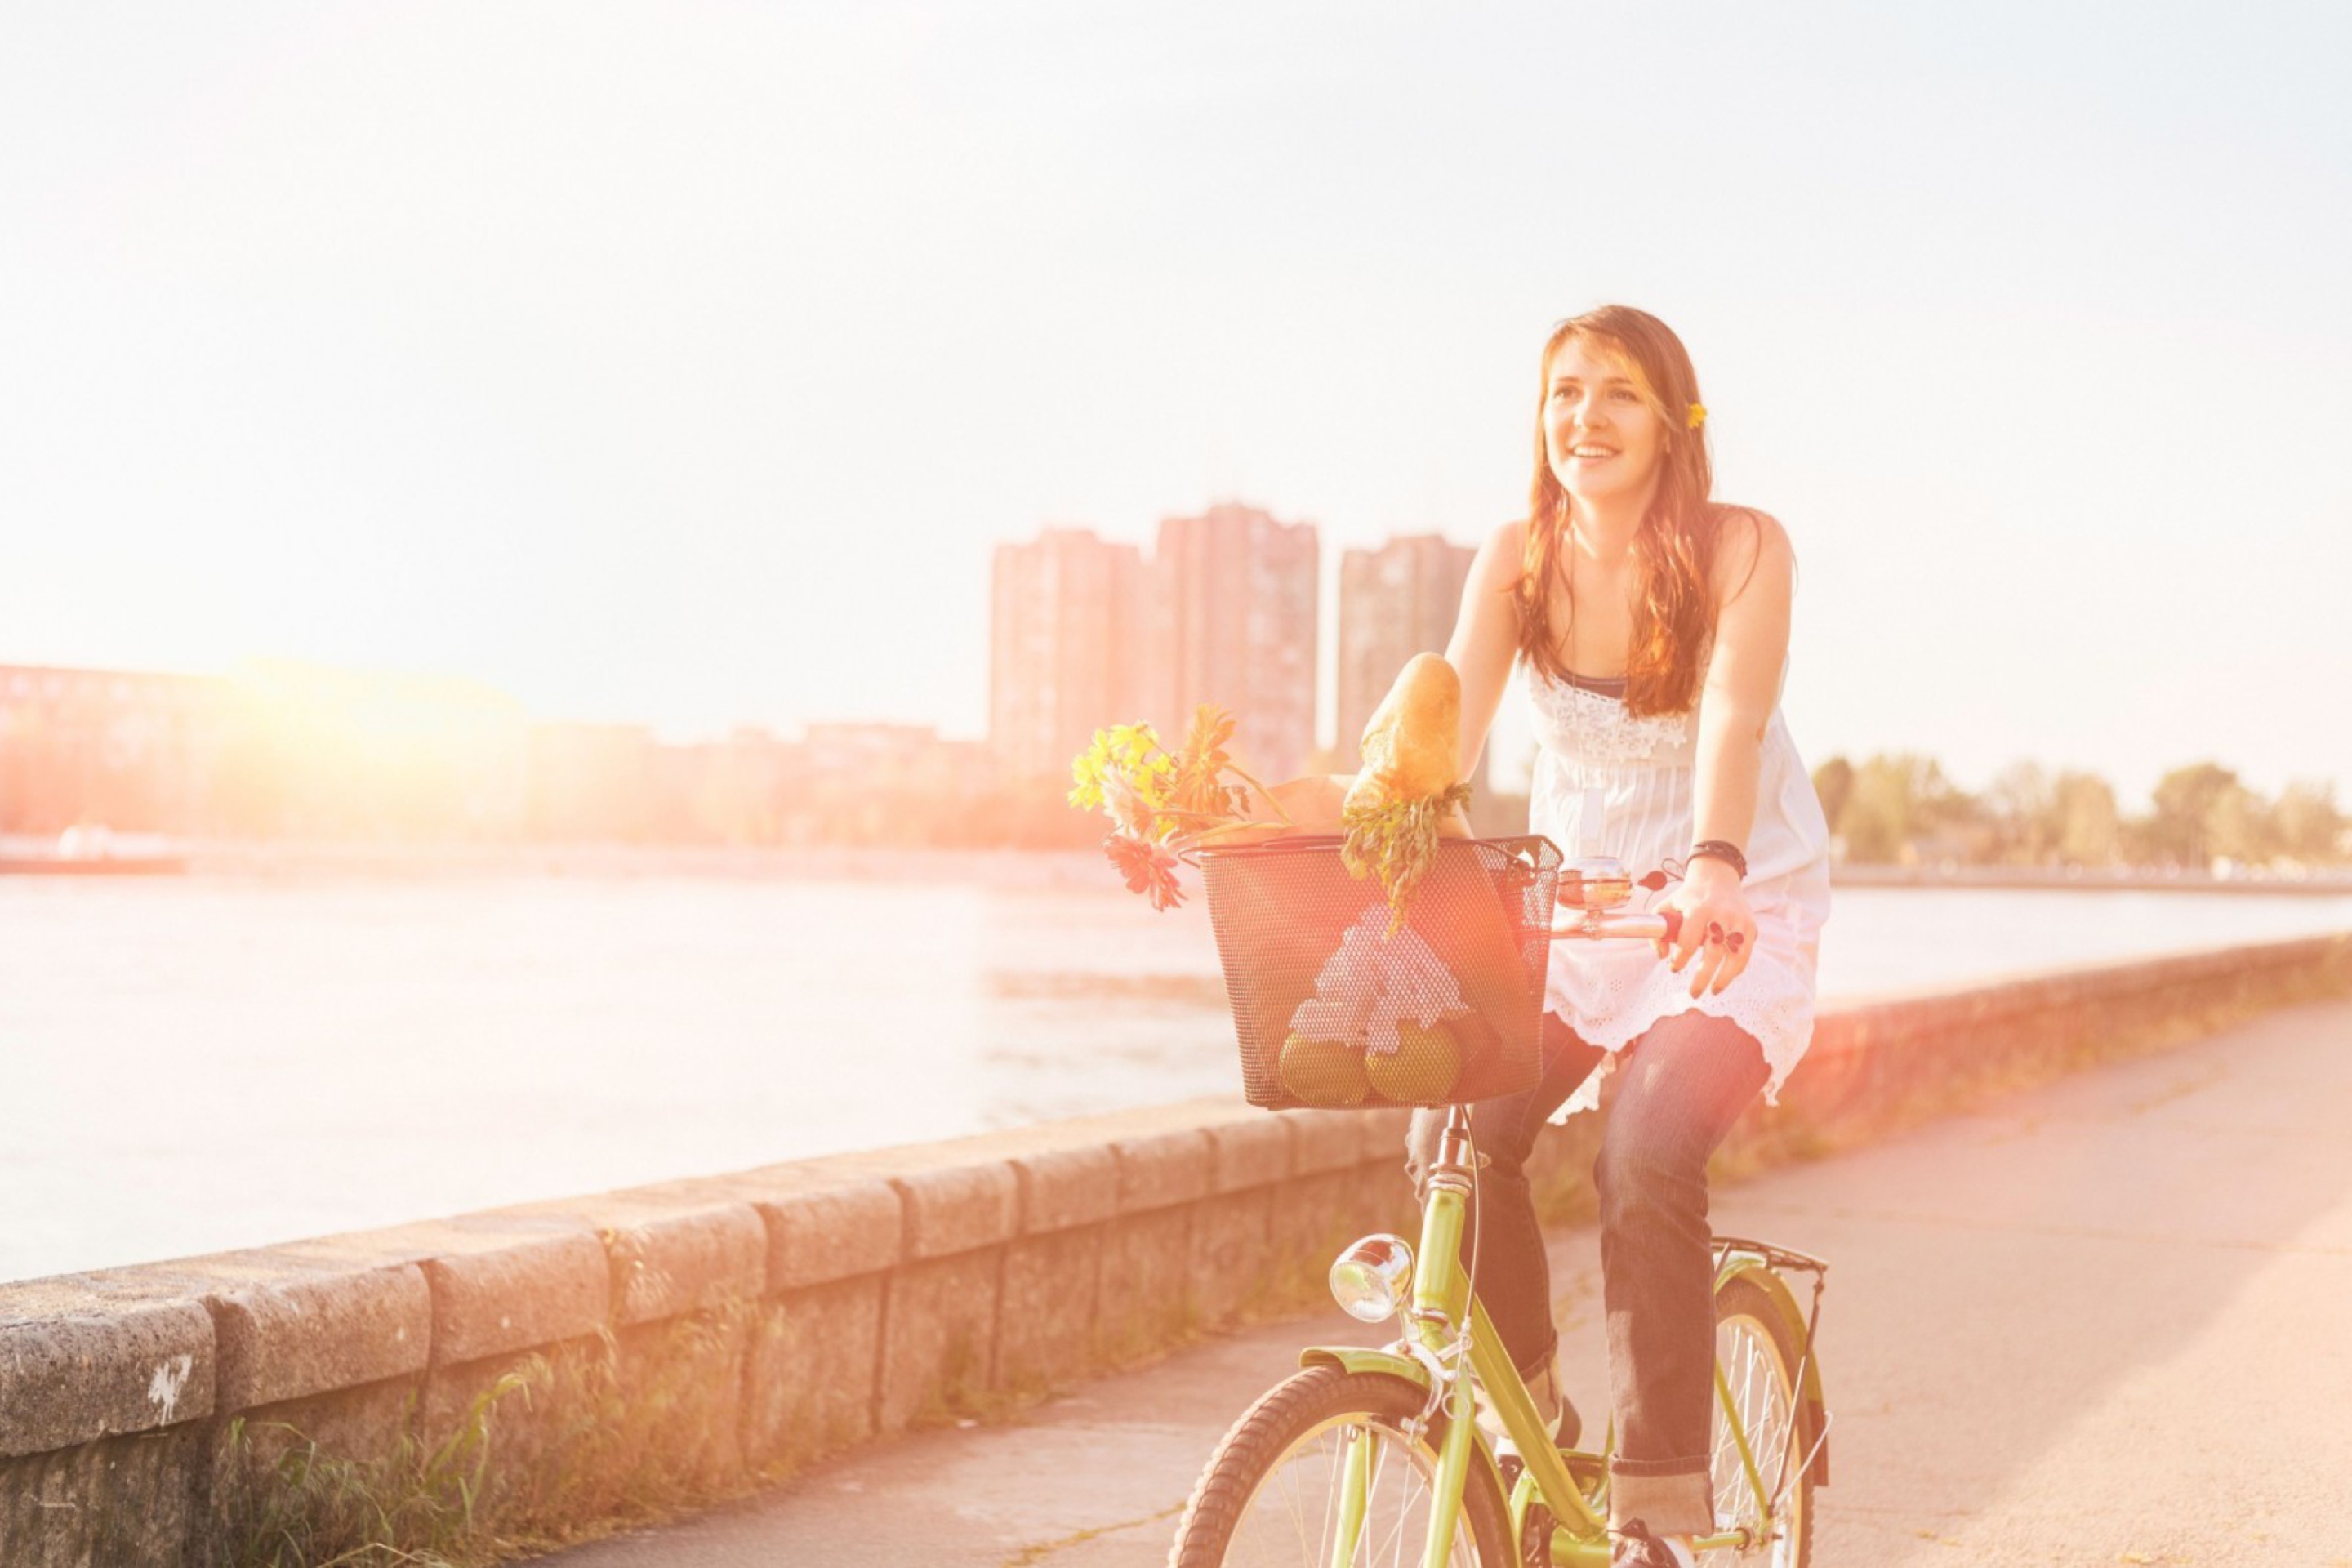 Girl On Bicycle In Sun Lights wallpaper 2880x1920